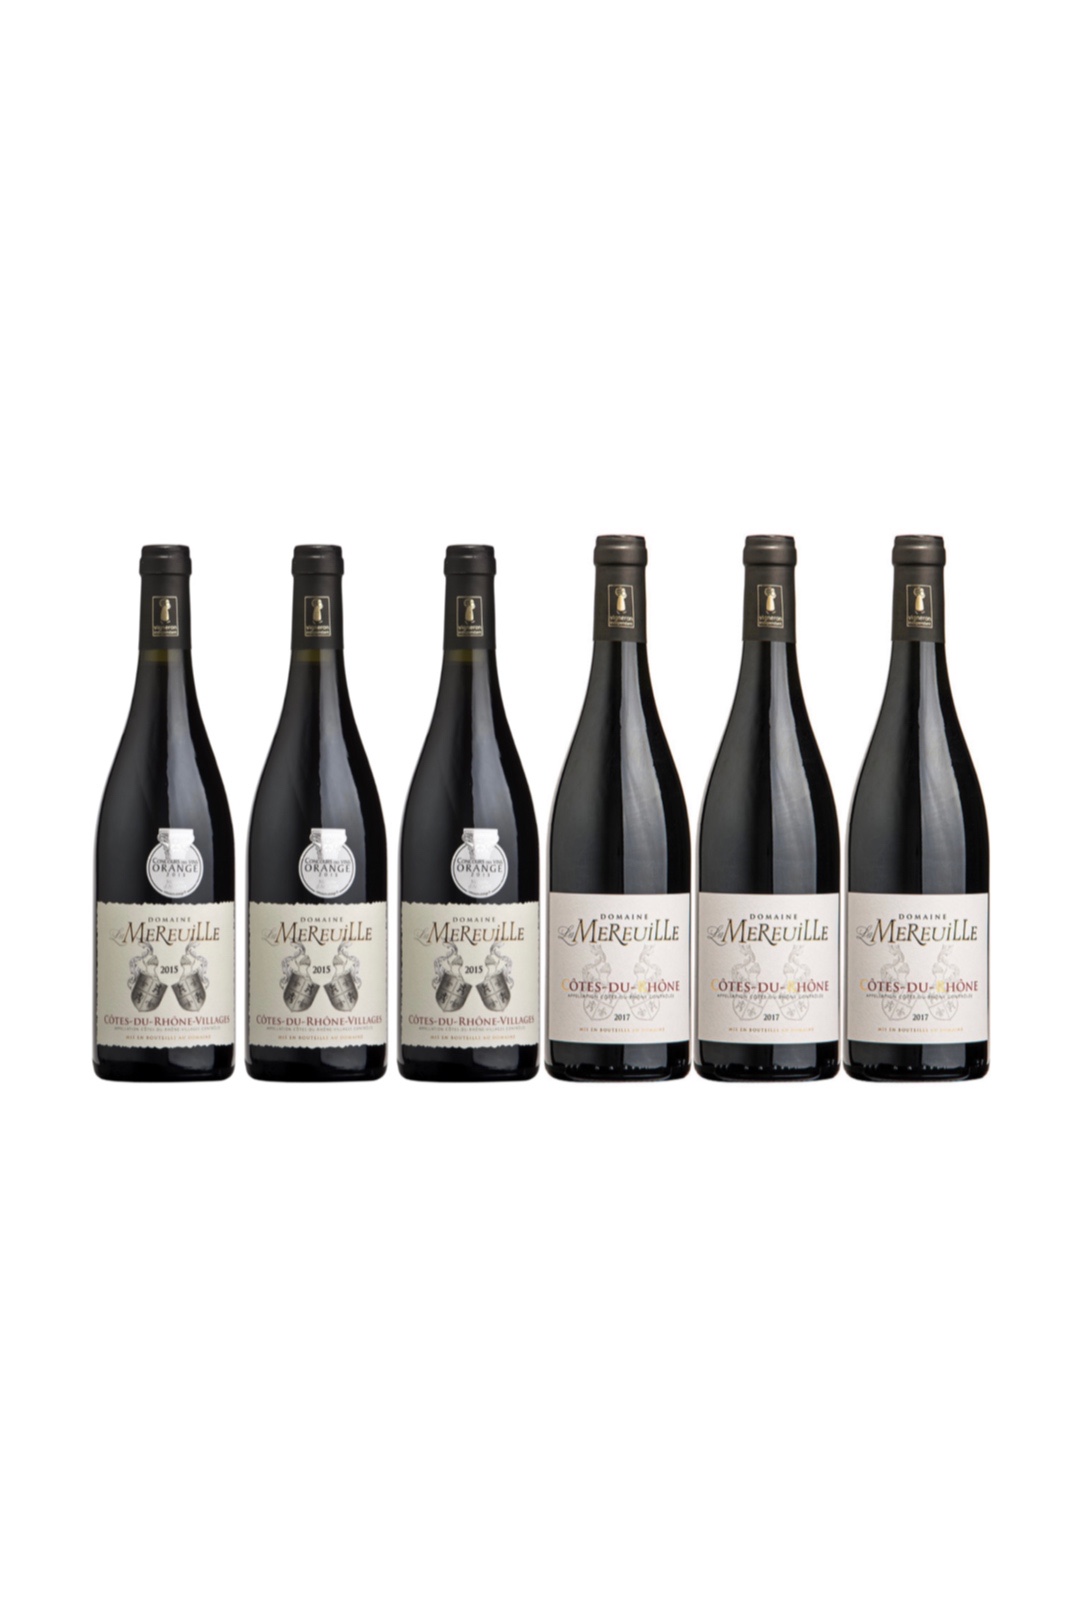 6 Award Winning Cotes Du Rhone Rouge and Village From Mereuille at only $180